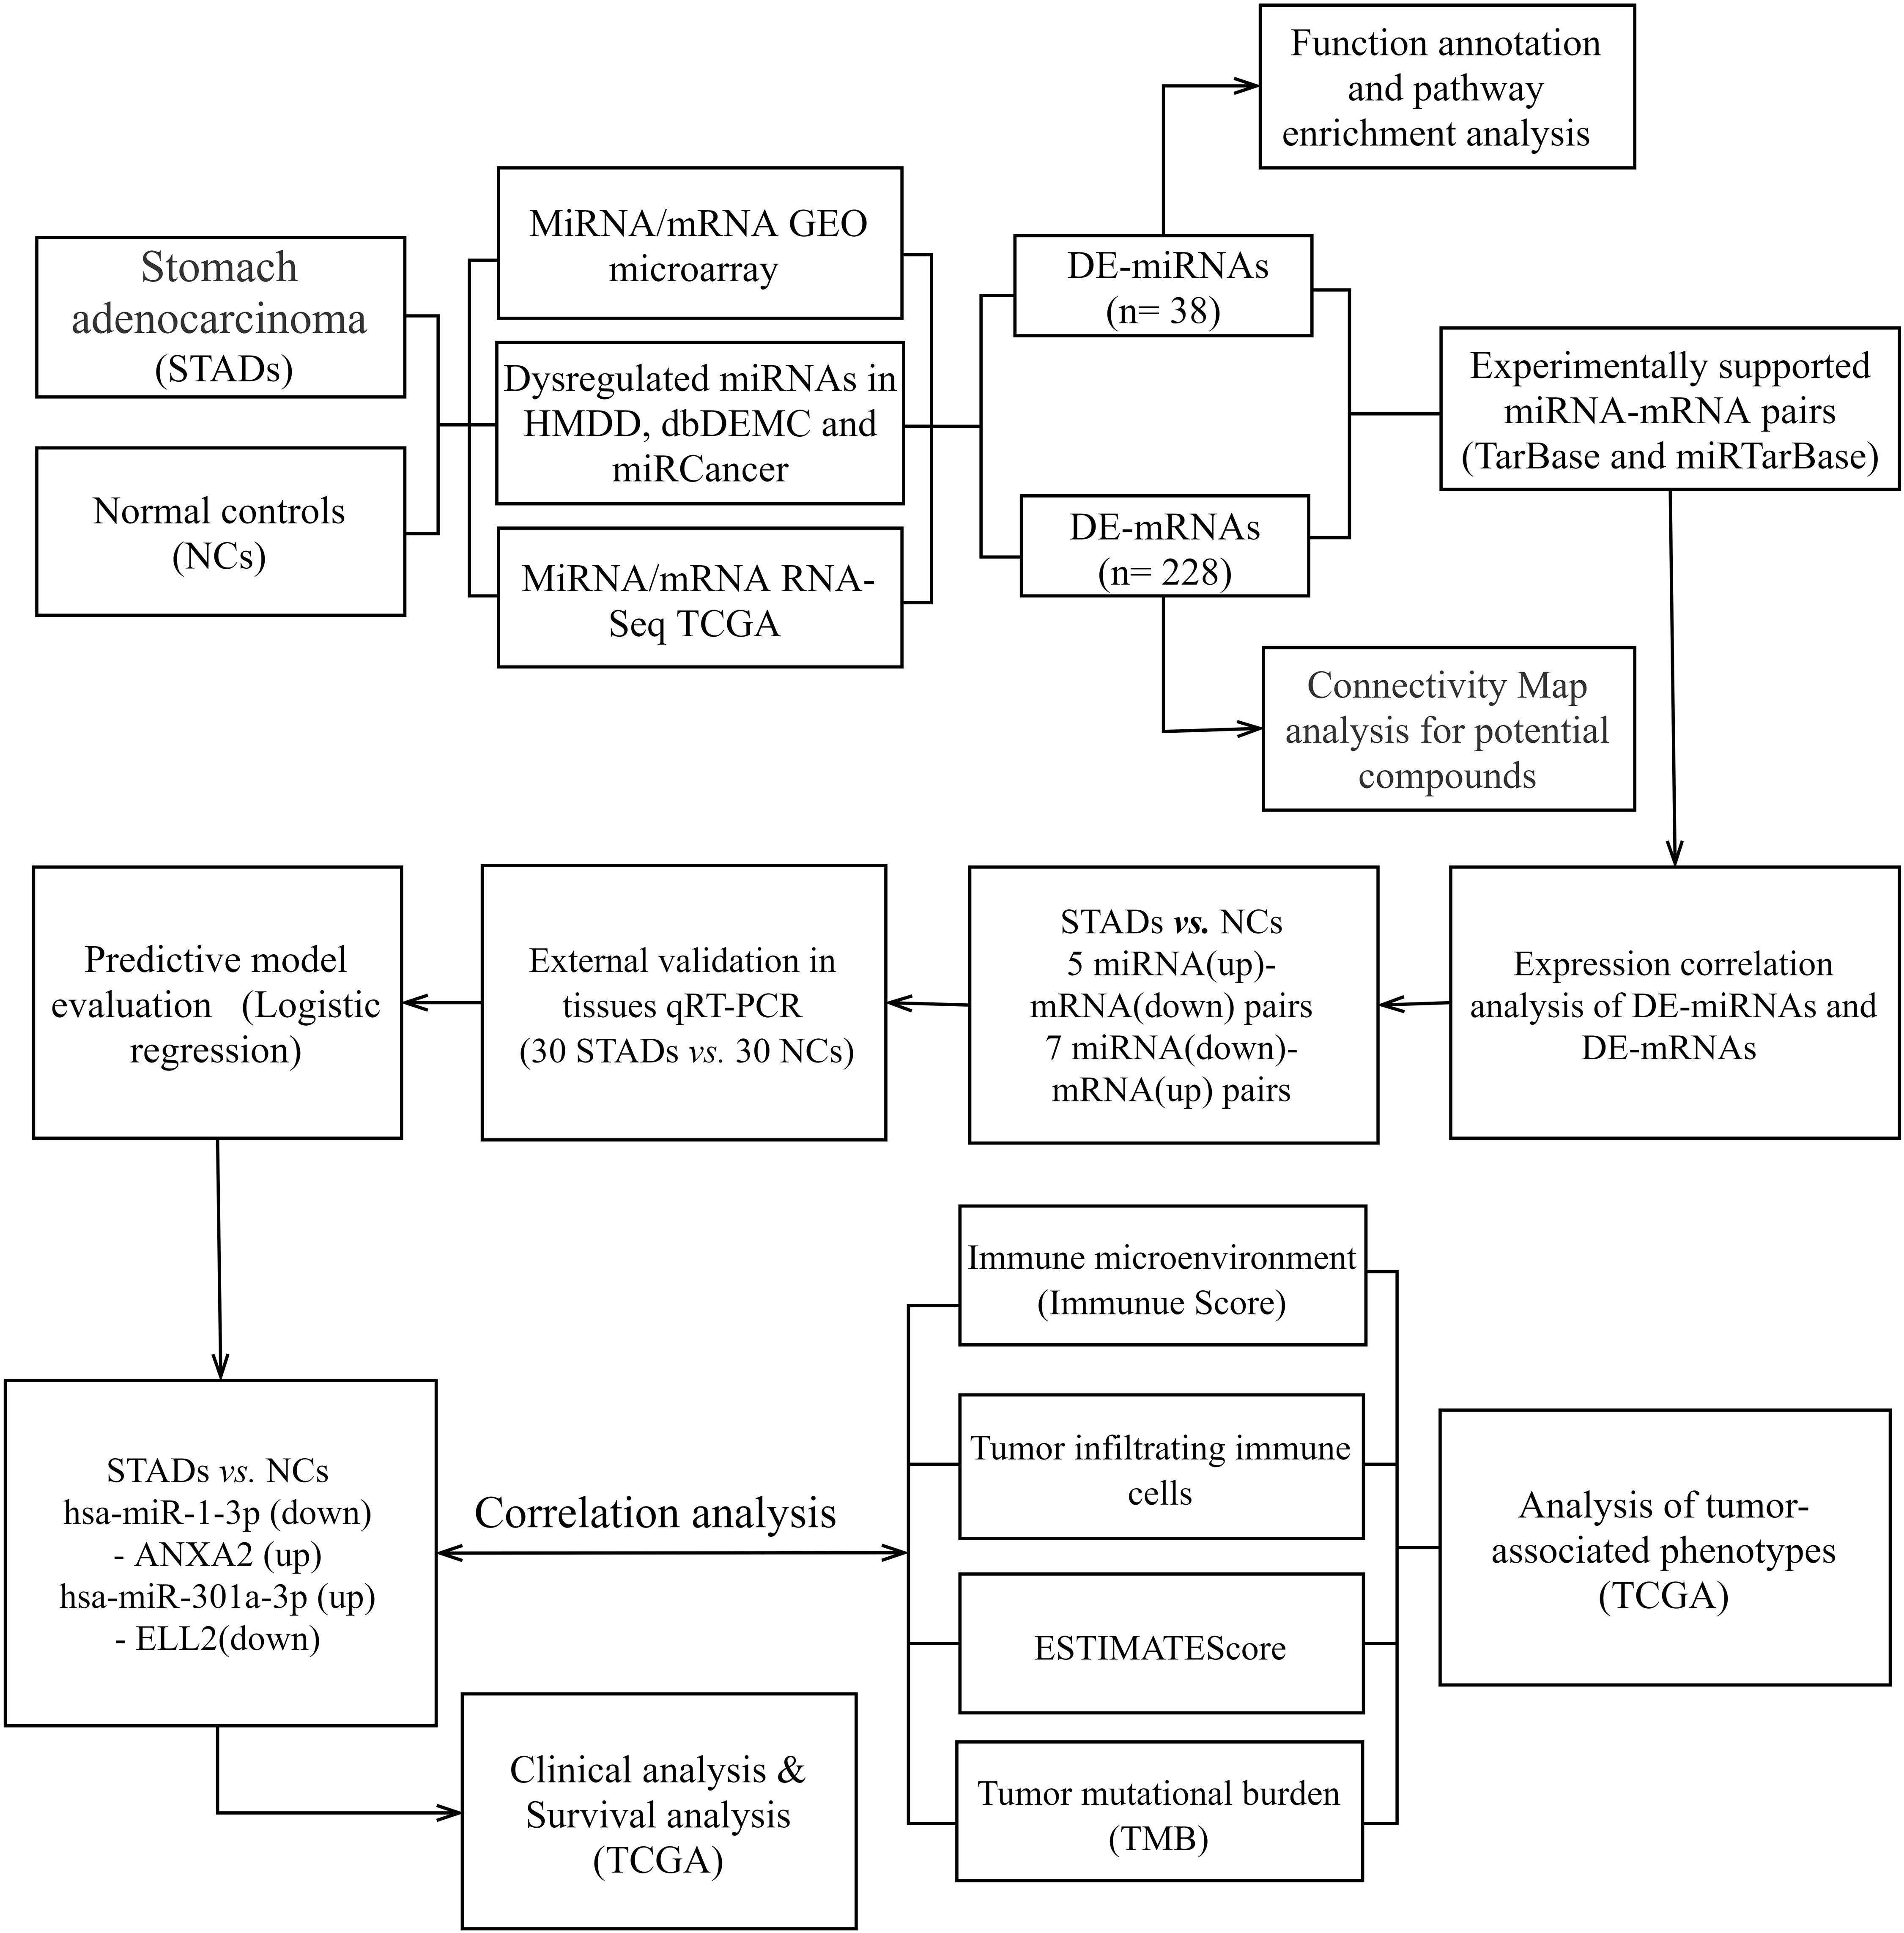 The Flow chart displayed the procedures of identifying miRNA-mRNA axes and extensive analysis for gastric cancer in this study.